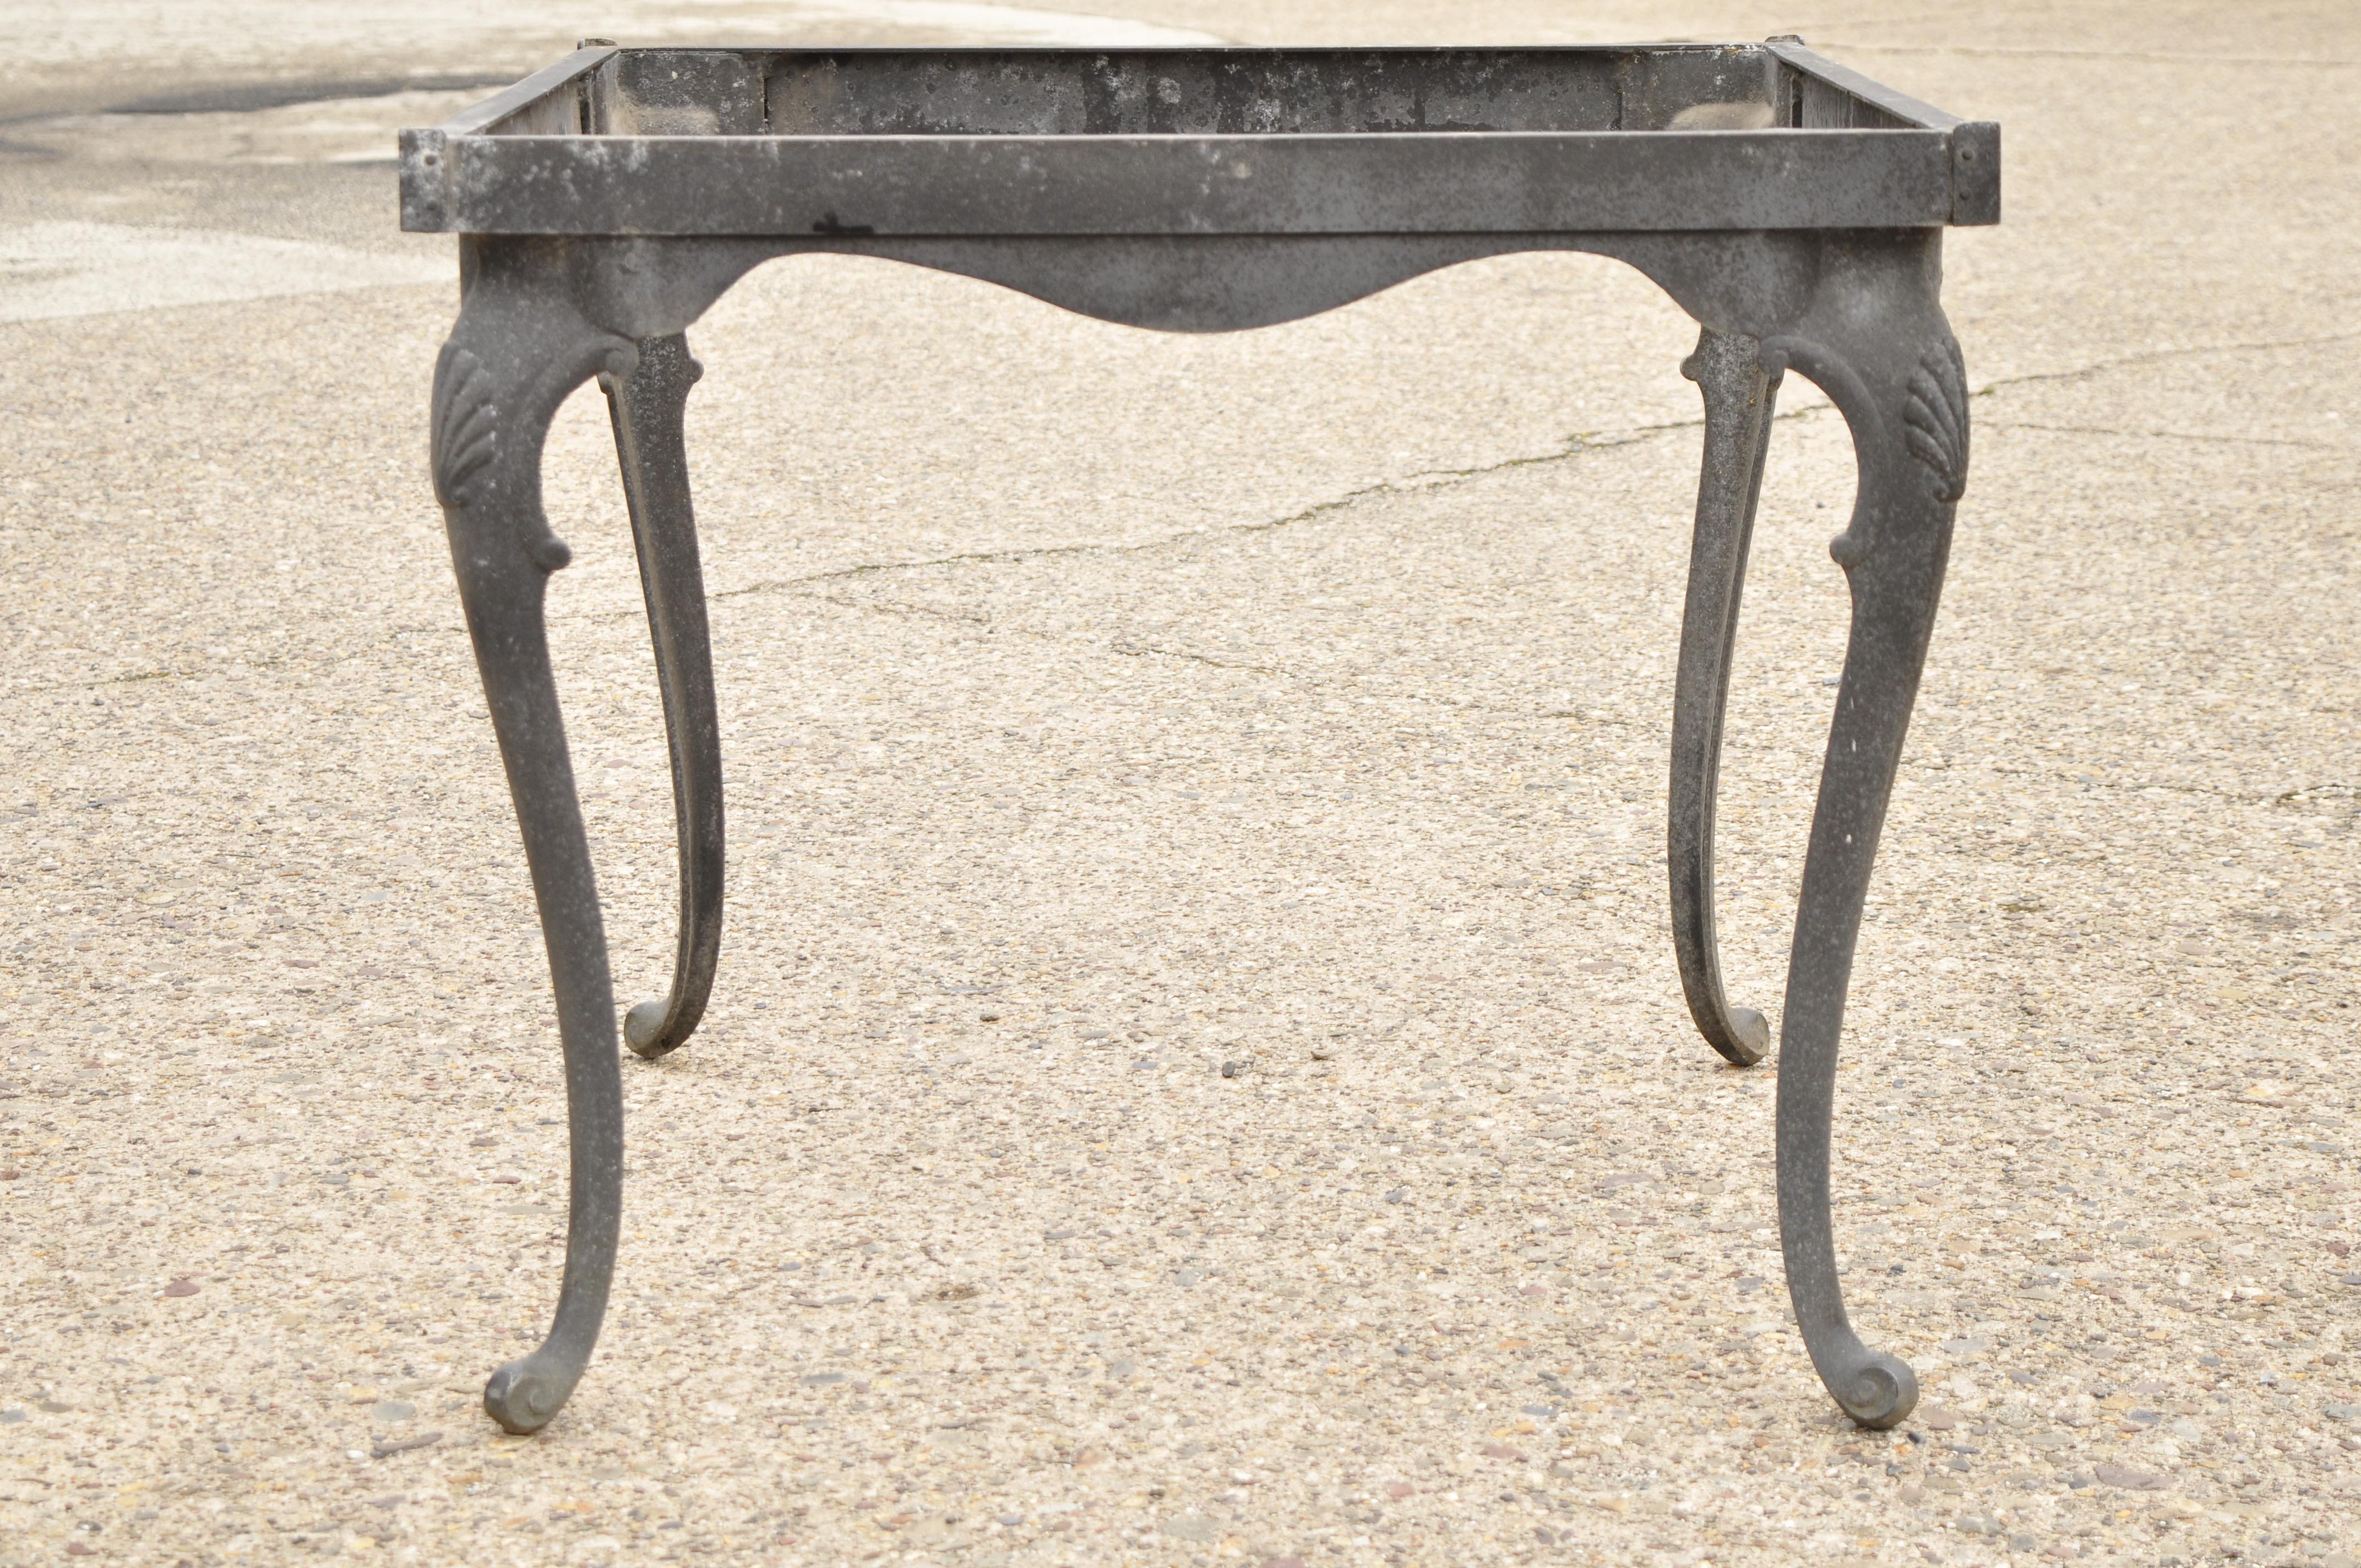 Vintage cast aluminum cabriole leg shell square patio dining table attributed to Molla. Item includes shell accents to knees, cats aluminum construction, cabriole legs, very nice vintage item, circa mid-late 20th century. Measurements: 28.5